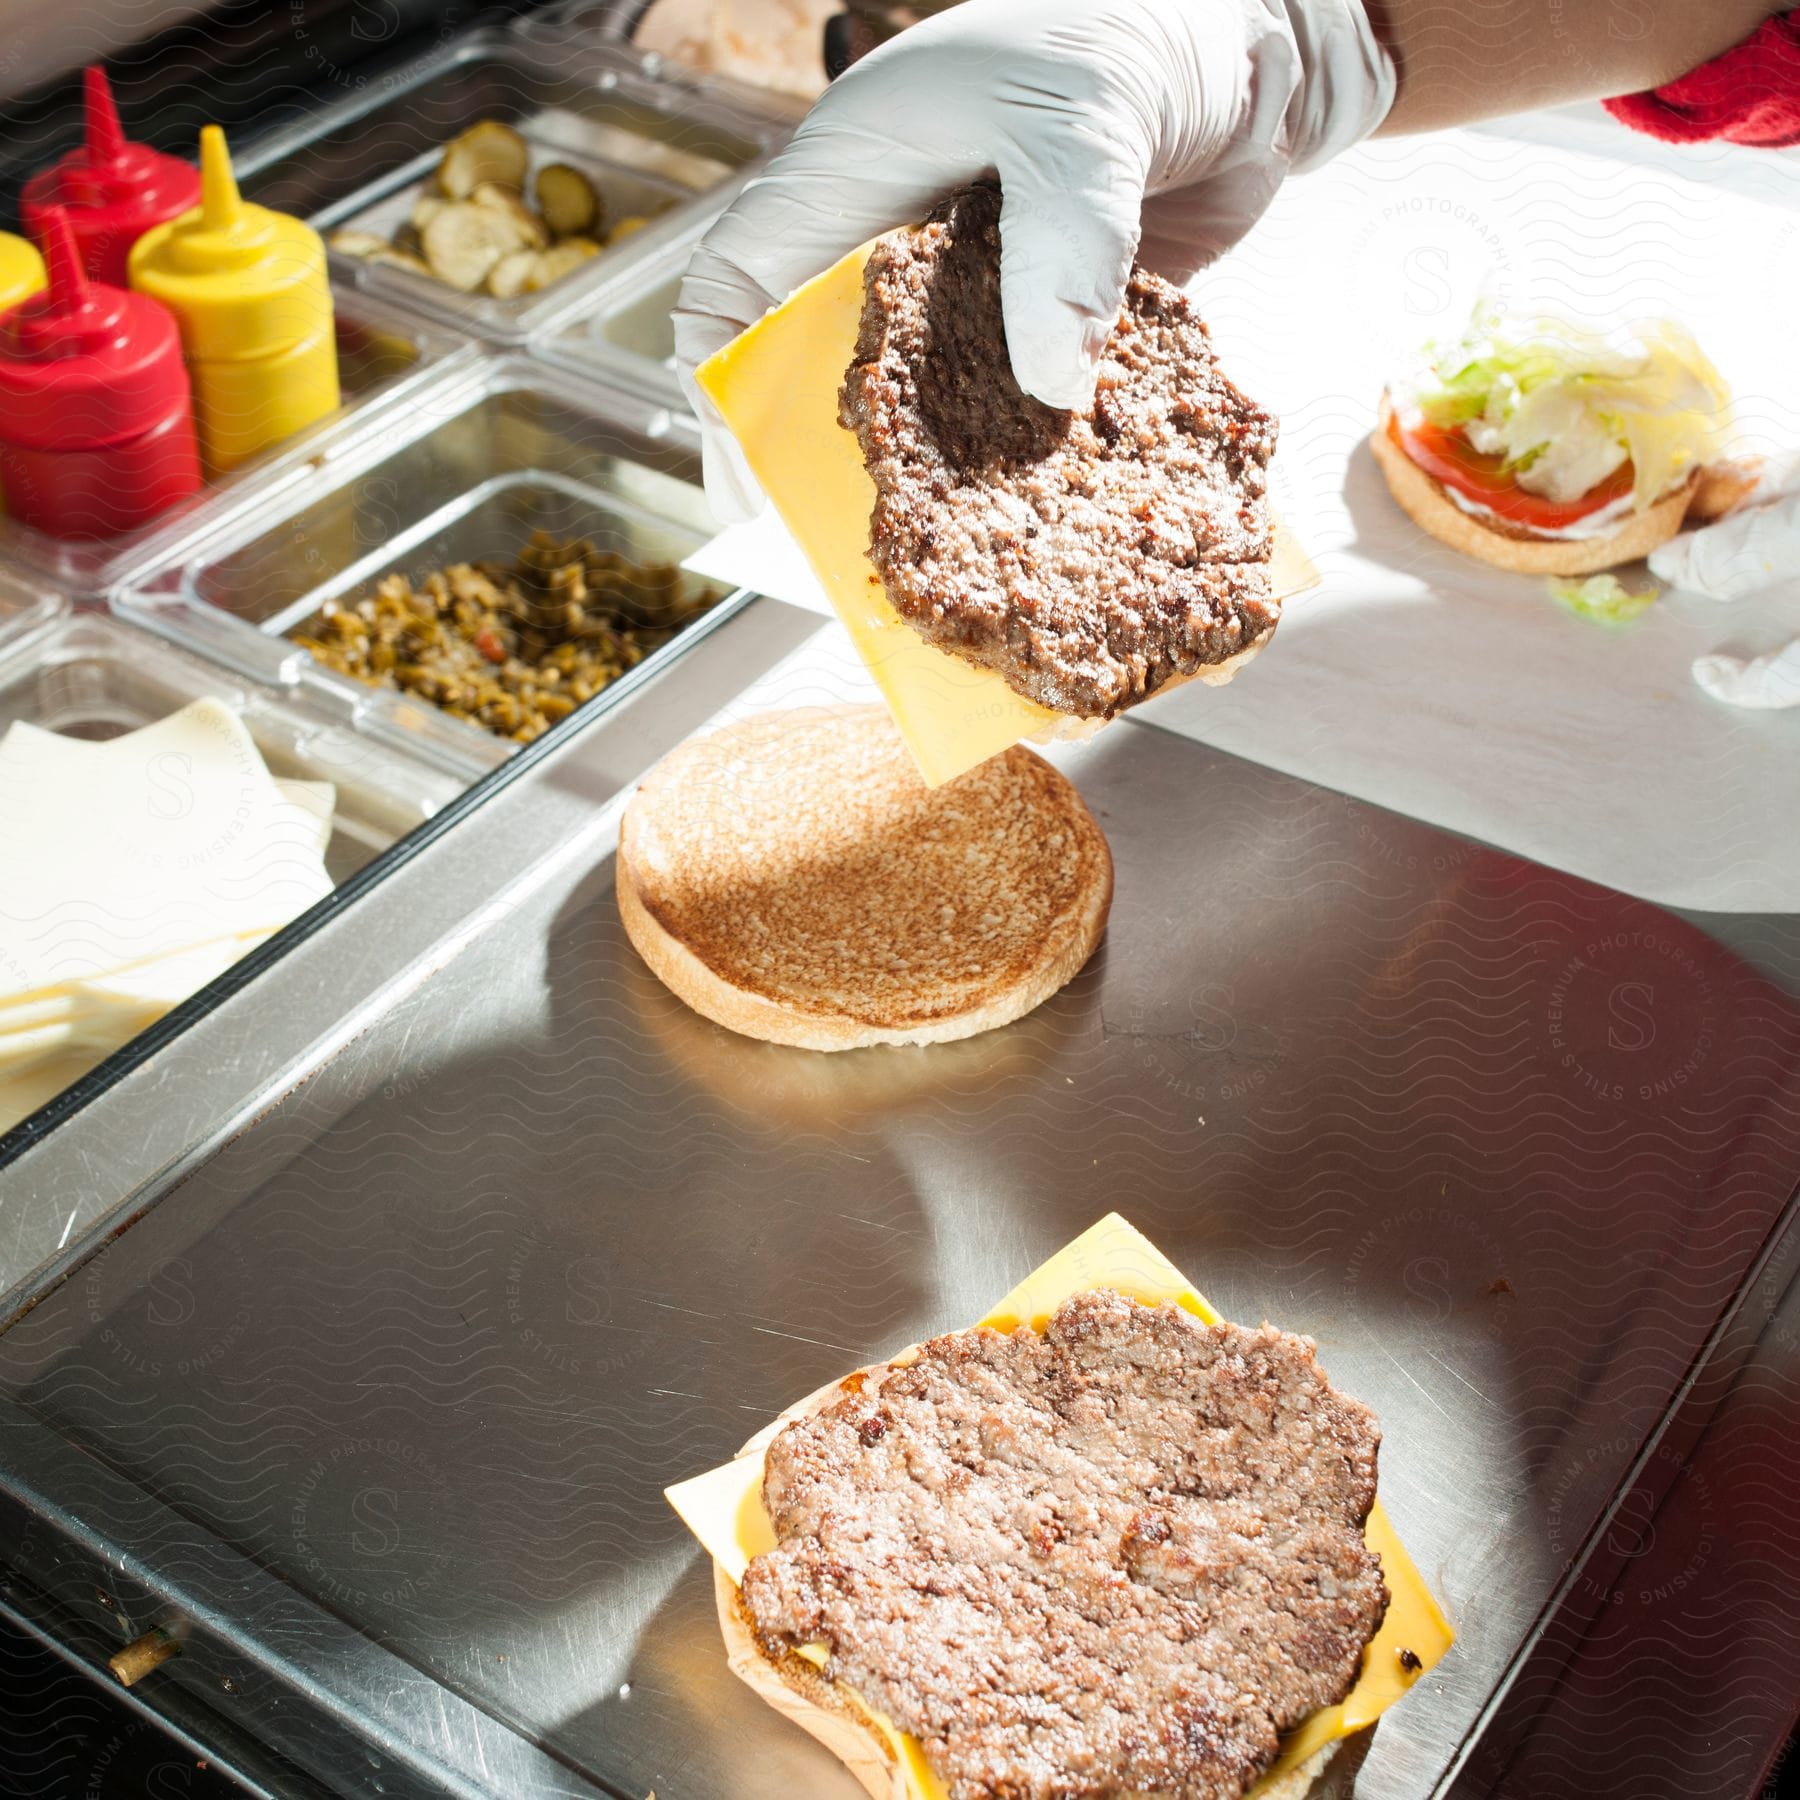 Hand placing a meat patty with cheese over a bun with other ingredients like lettuce pickles and sauces